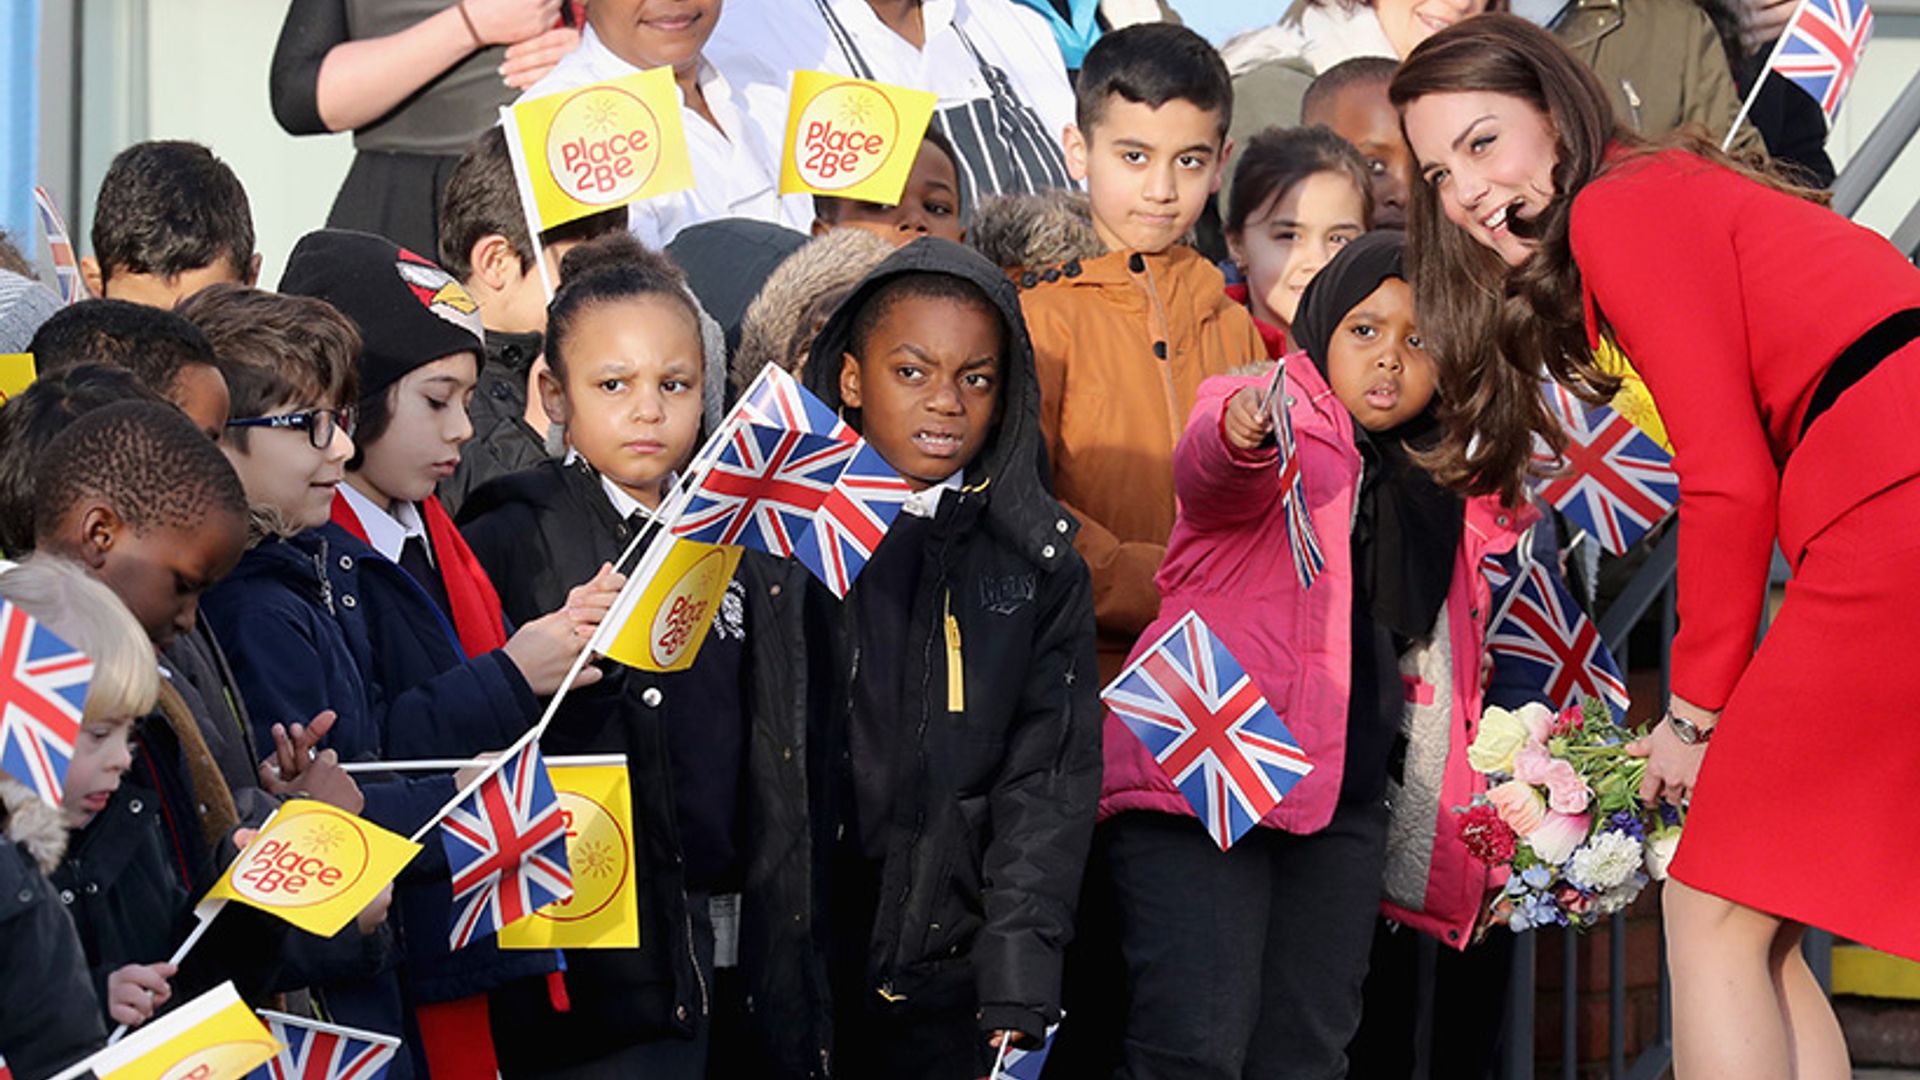 Duchess Kate delivers moving speech about kindness during school visit